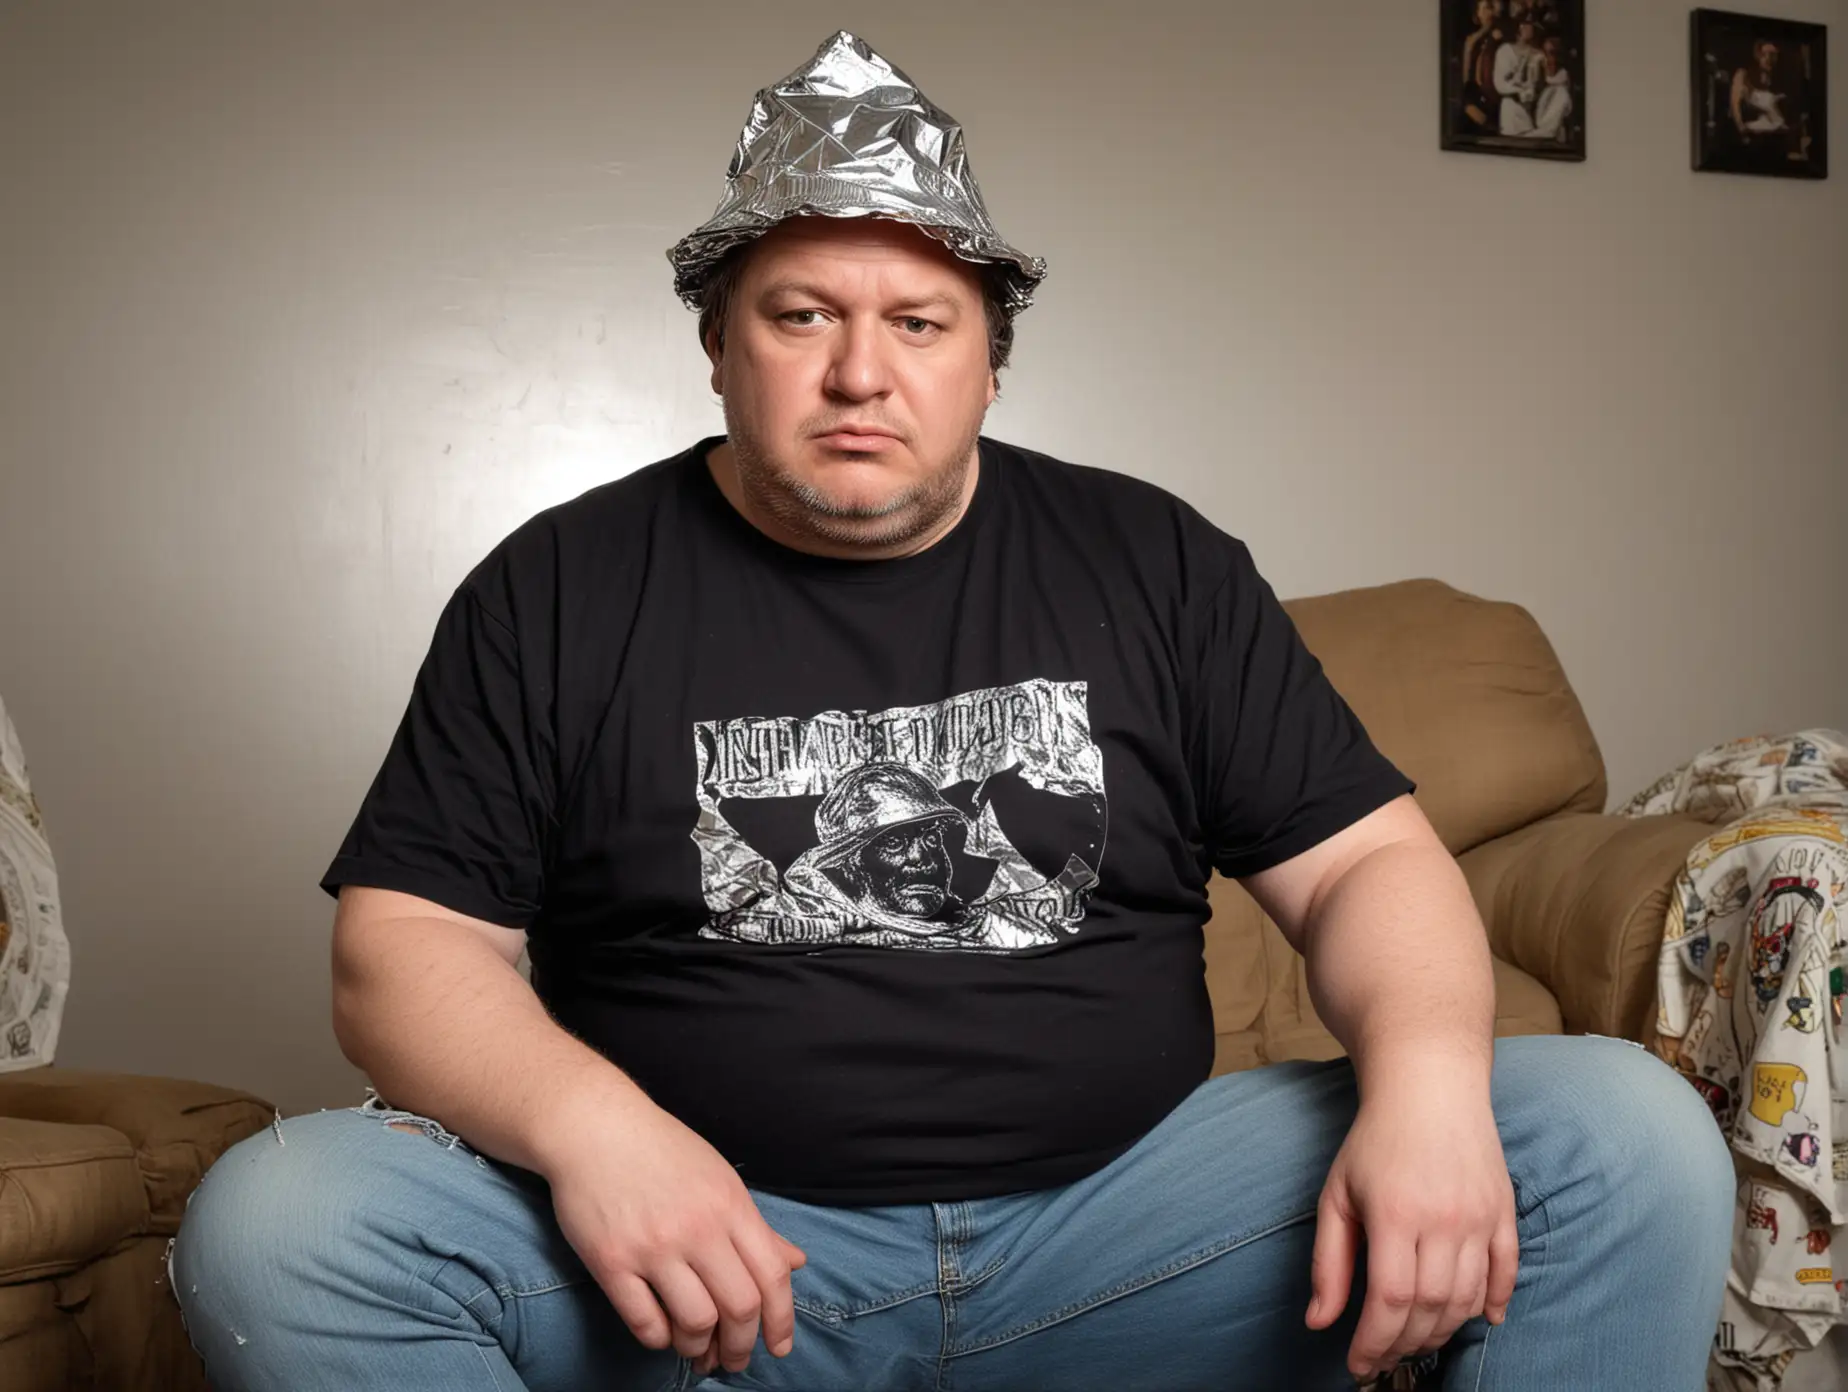 Middleaged Conspiracy Theorist in Tin Foil Hat at Home